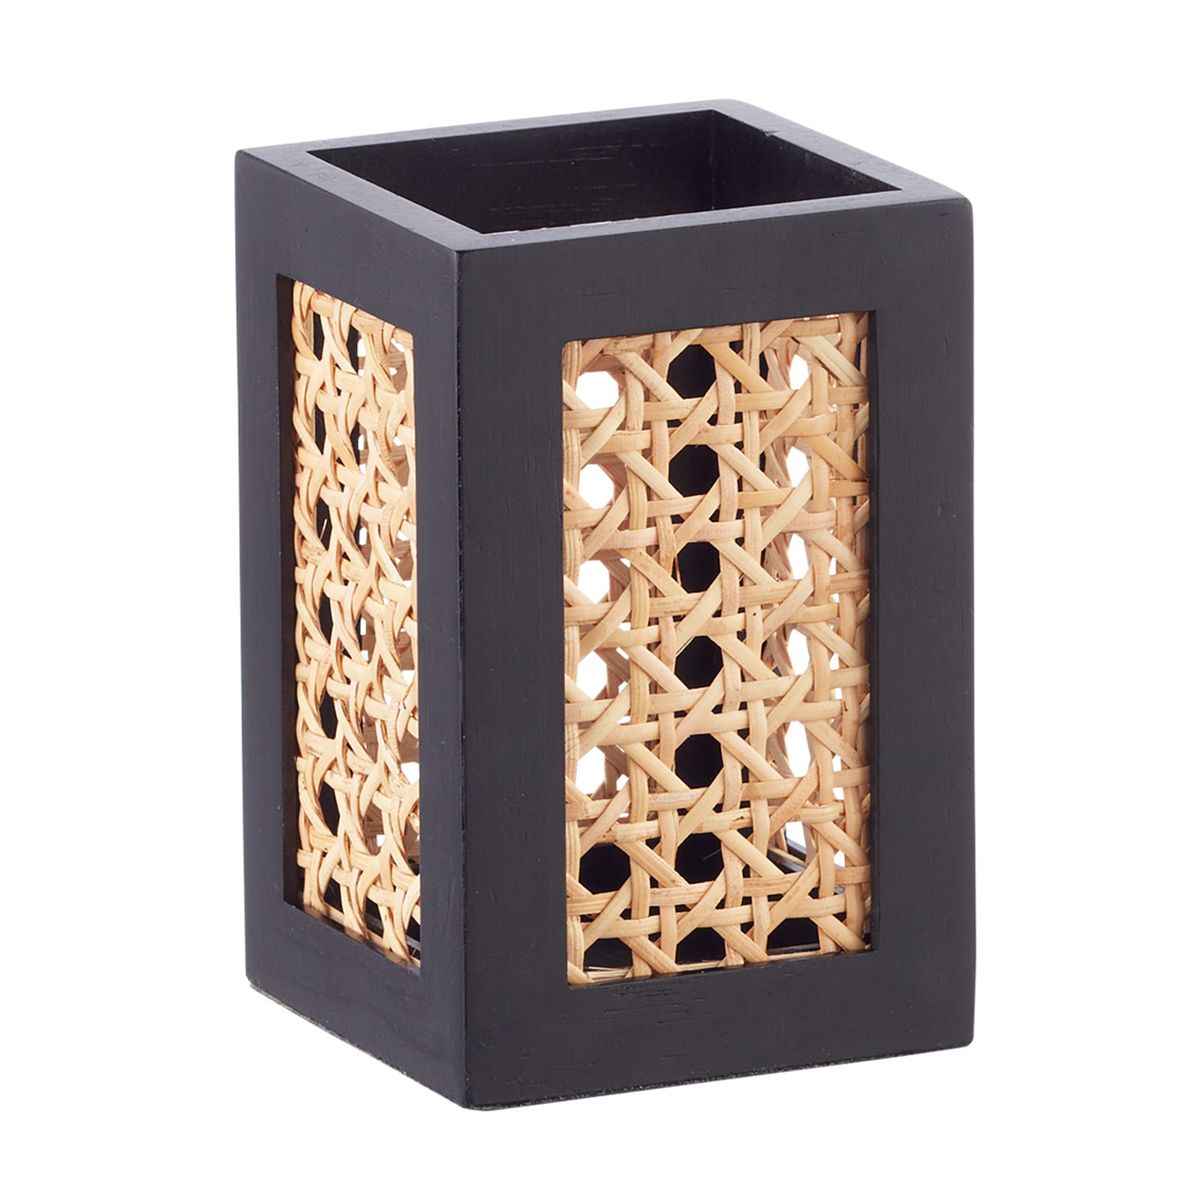 The Container Store Artisan Rattan Cane Pencil Cup | The Container Store